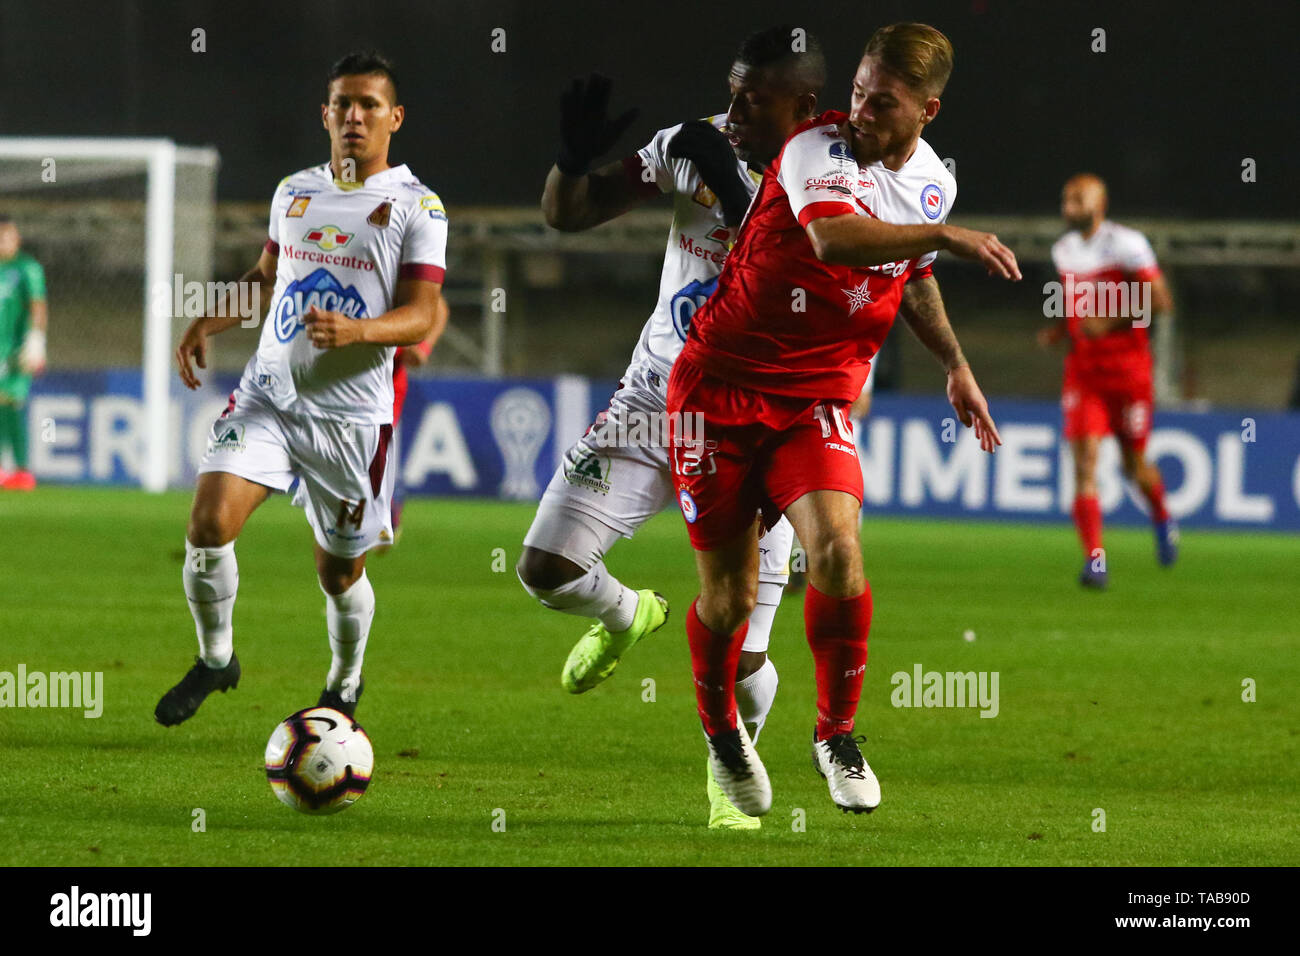 BUENOS AIRES, 23.05.2019: Alexis Mac Allister during the match between Argentinos Juniors and Deportes Tolima for the 2nd round of Conmebol Sudamerica Stock Photo